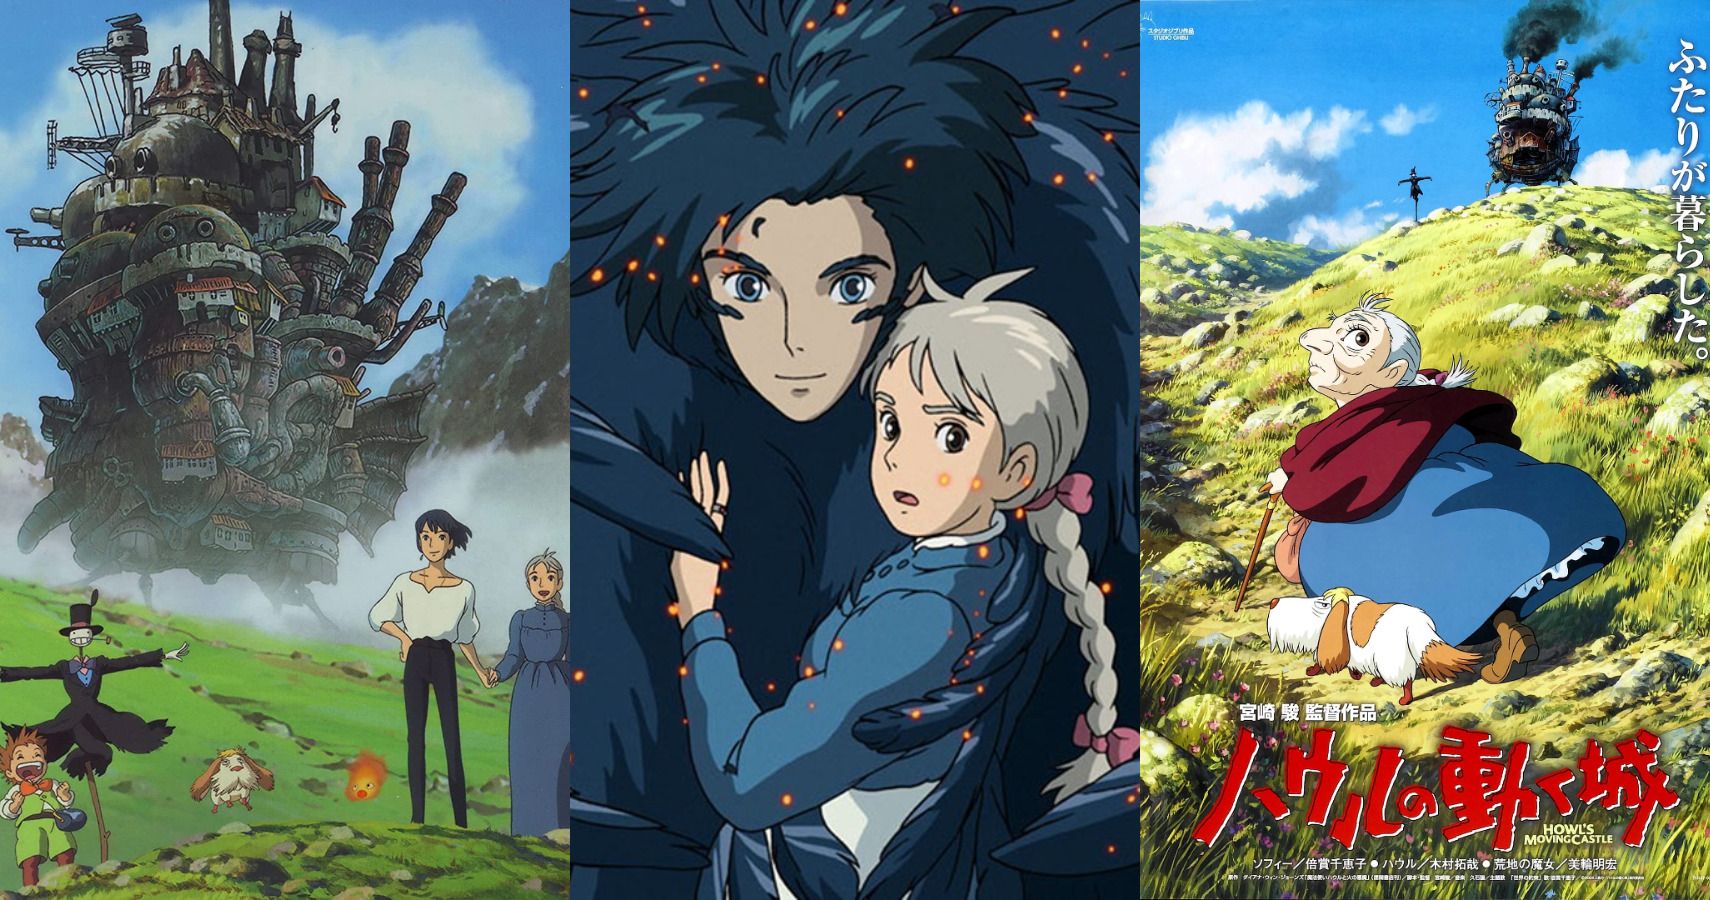 10 best Studio Ghibli films — from Spirited Away to Howl's Moving Castle